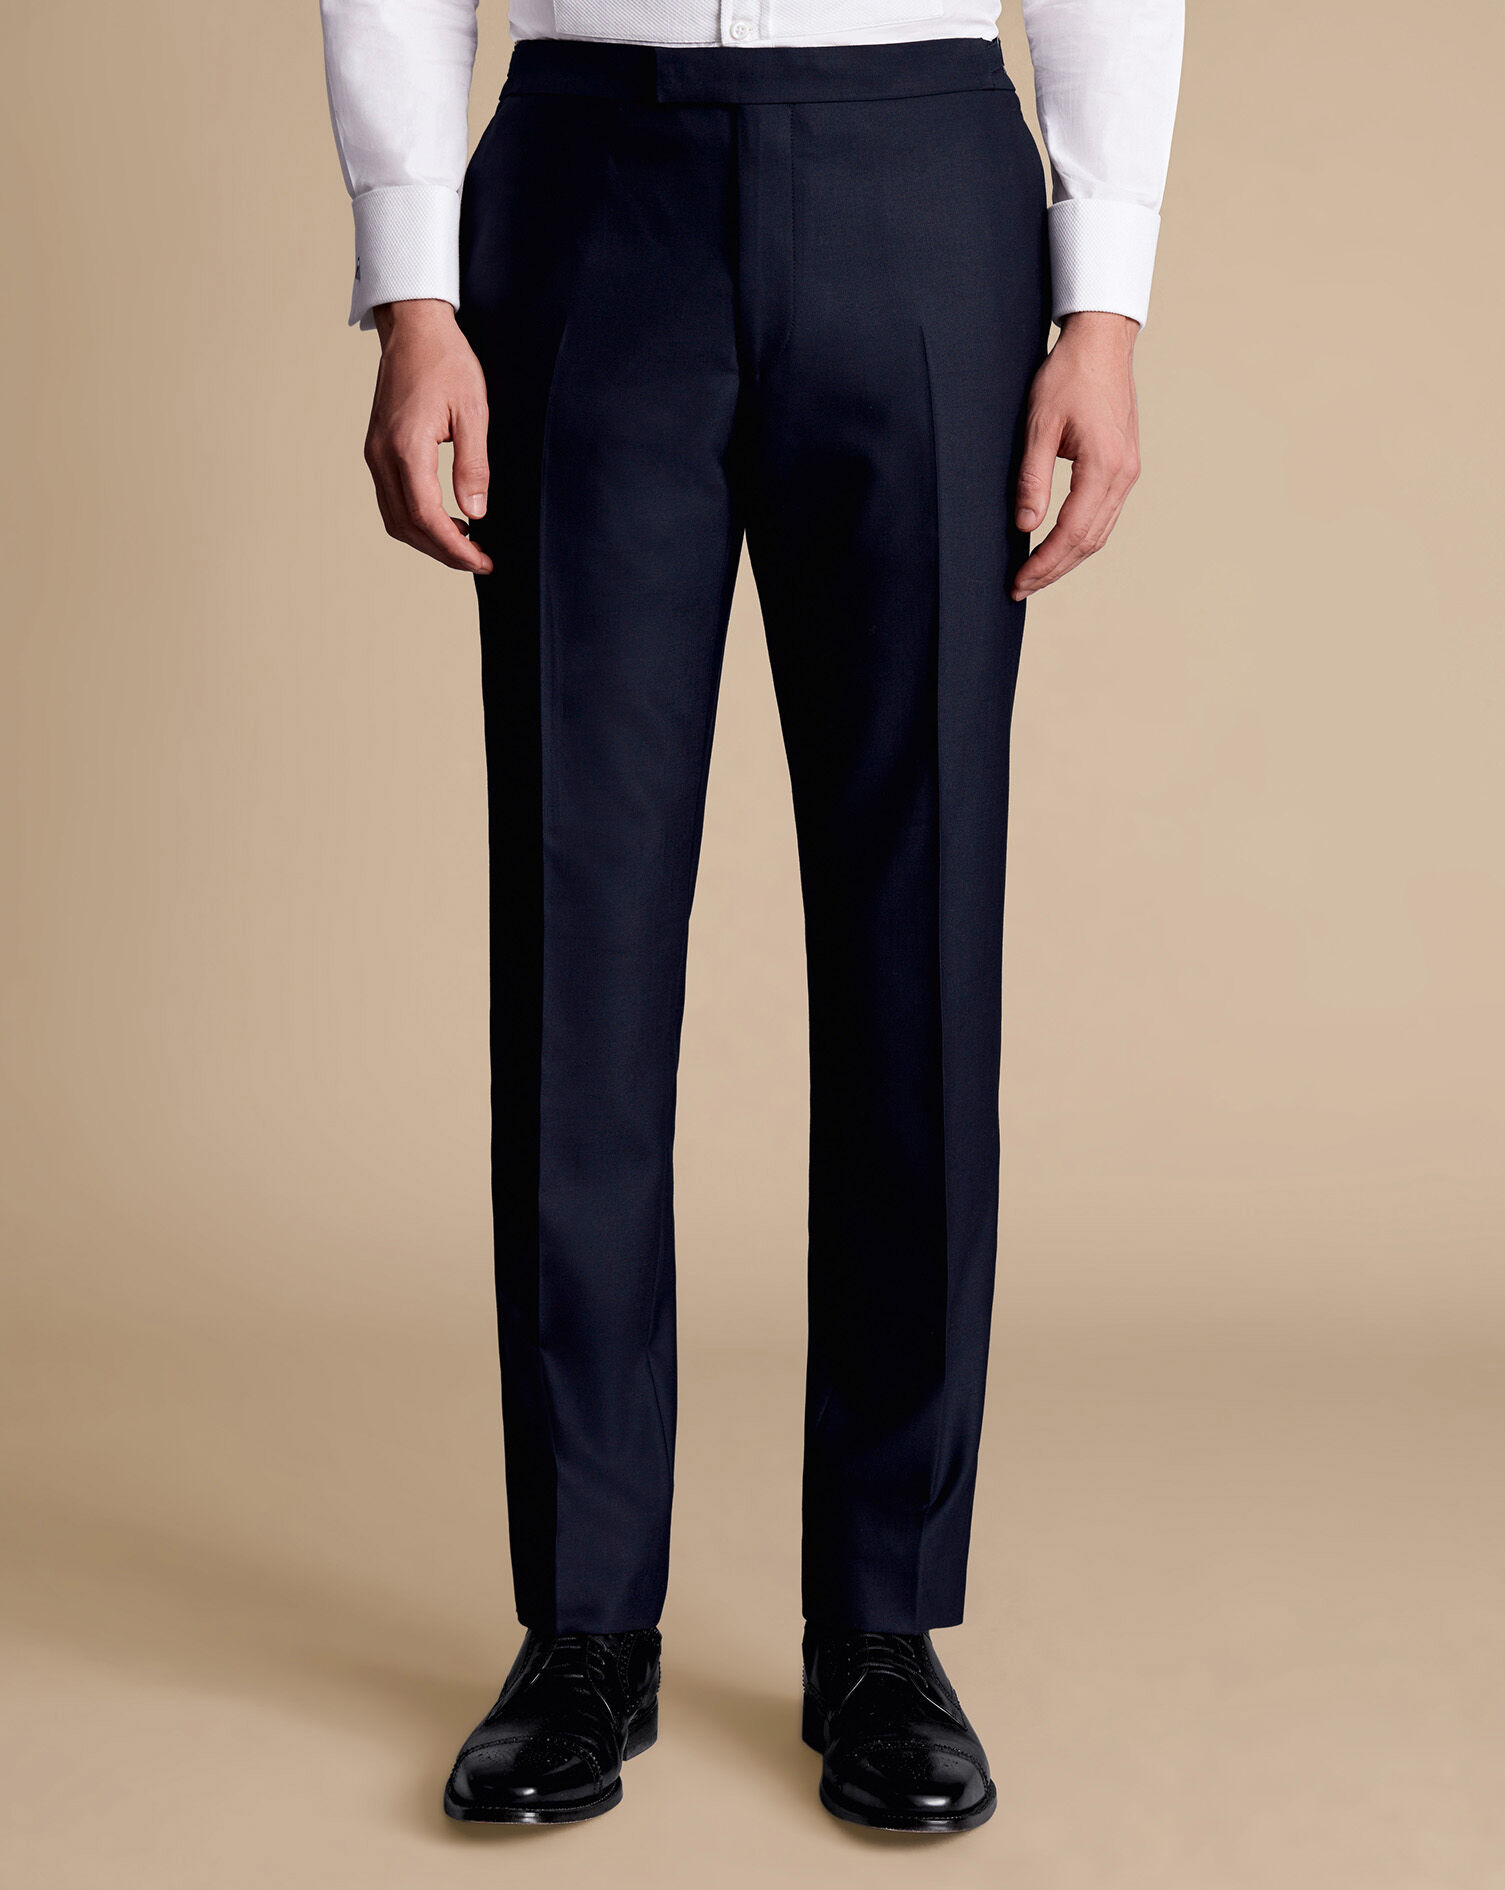 Formal men's pants of SUPER Prices • Sizes - STYLER